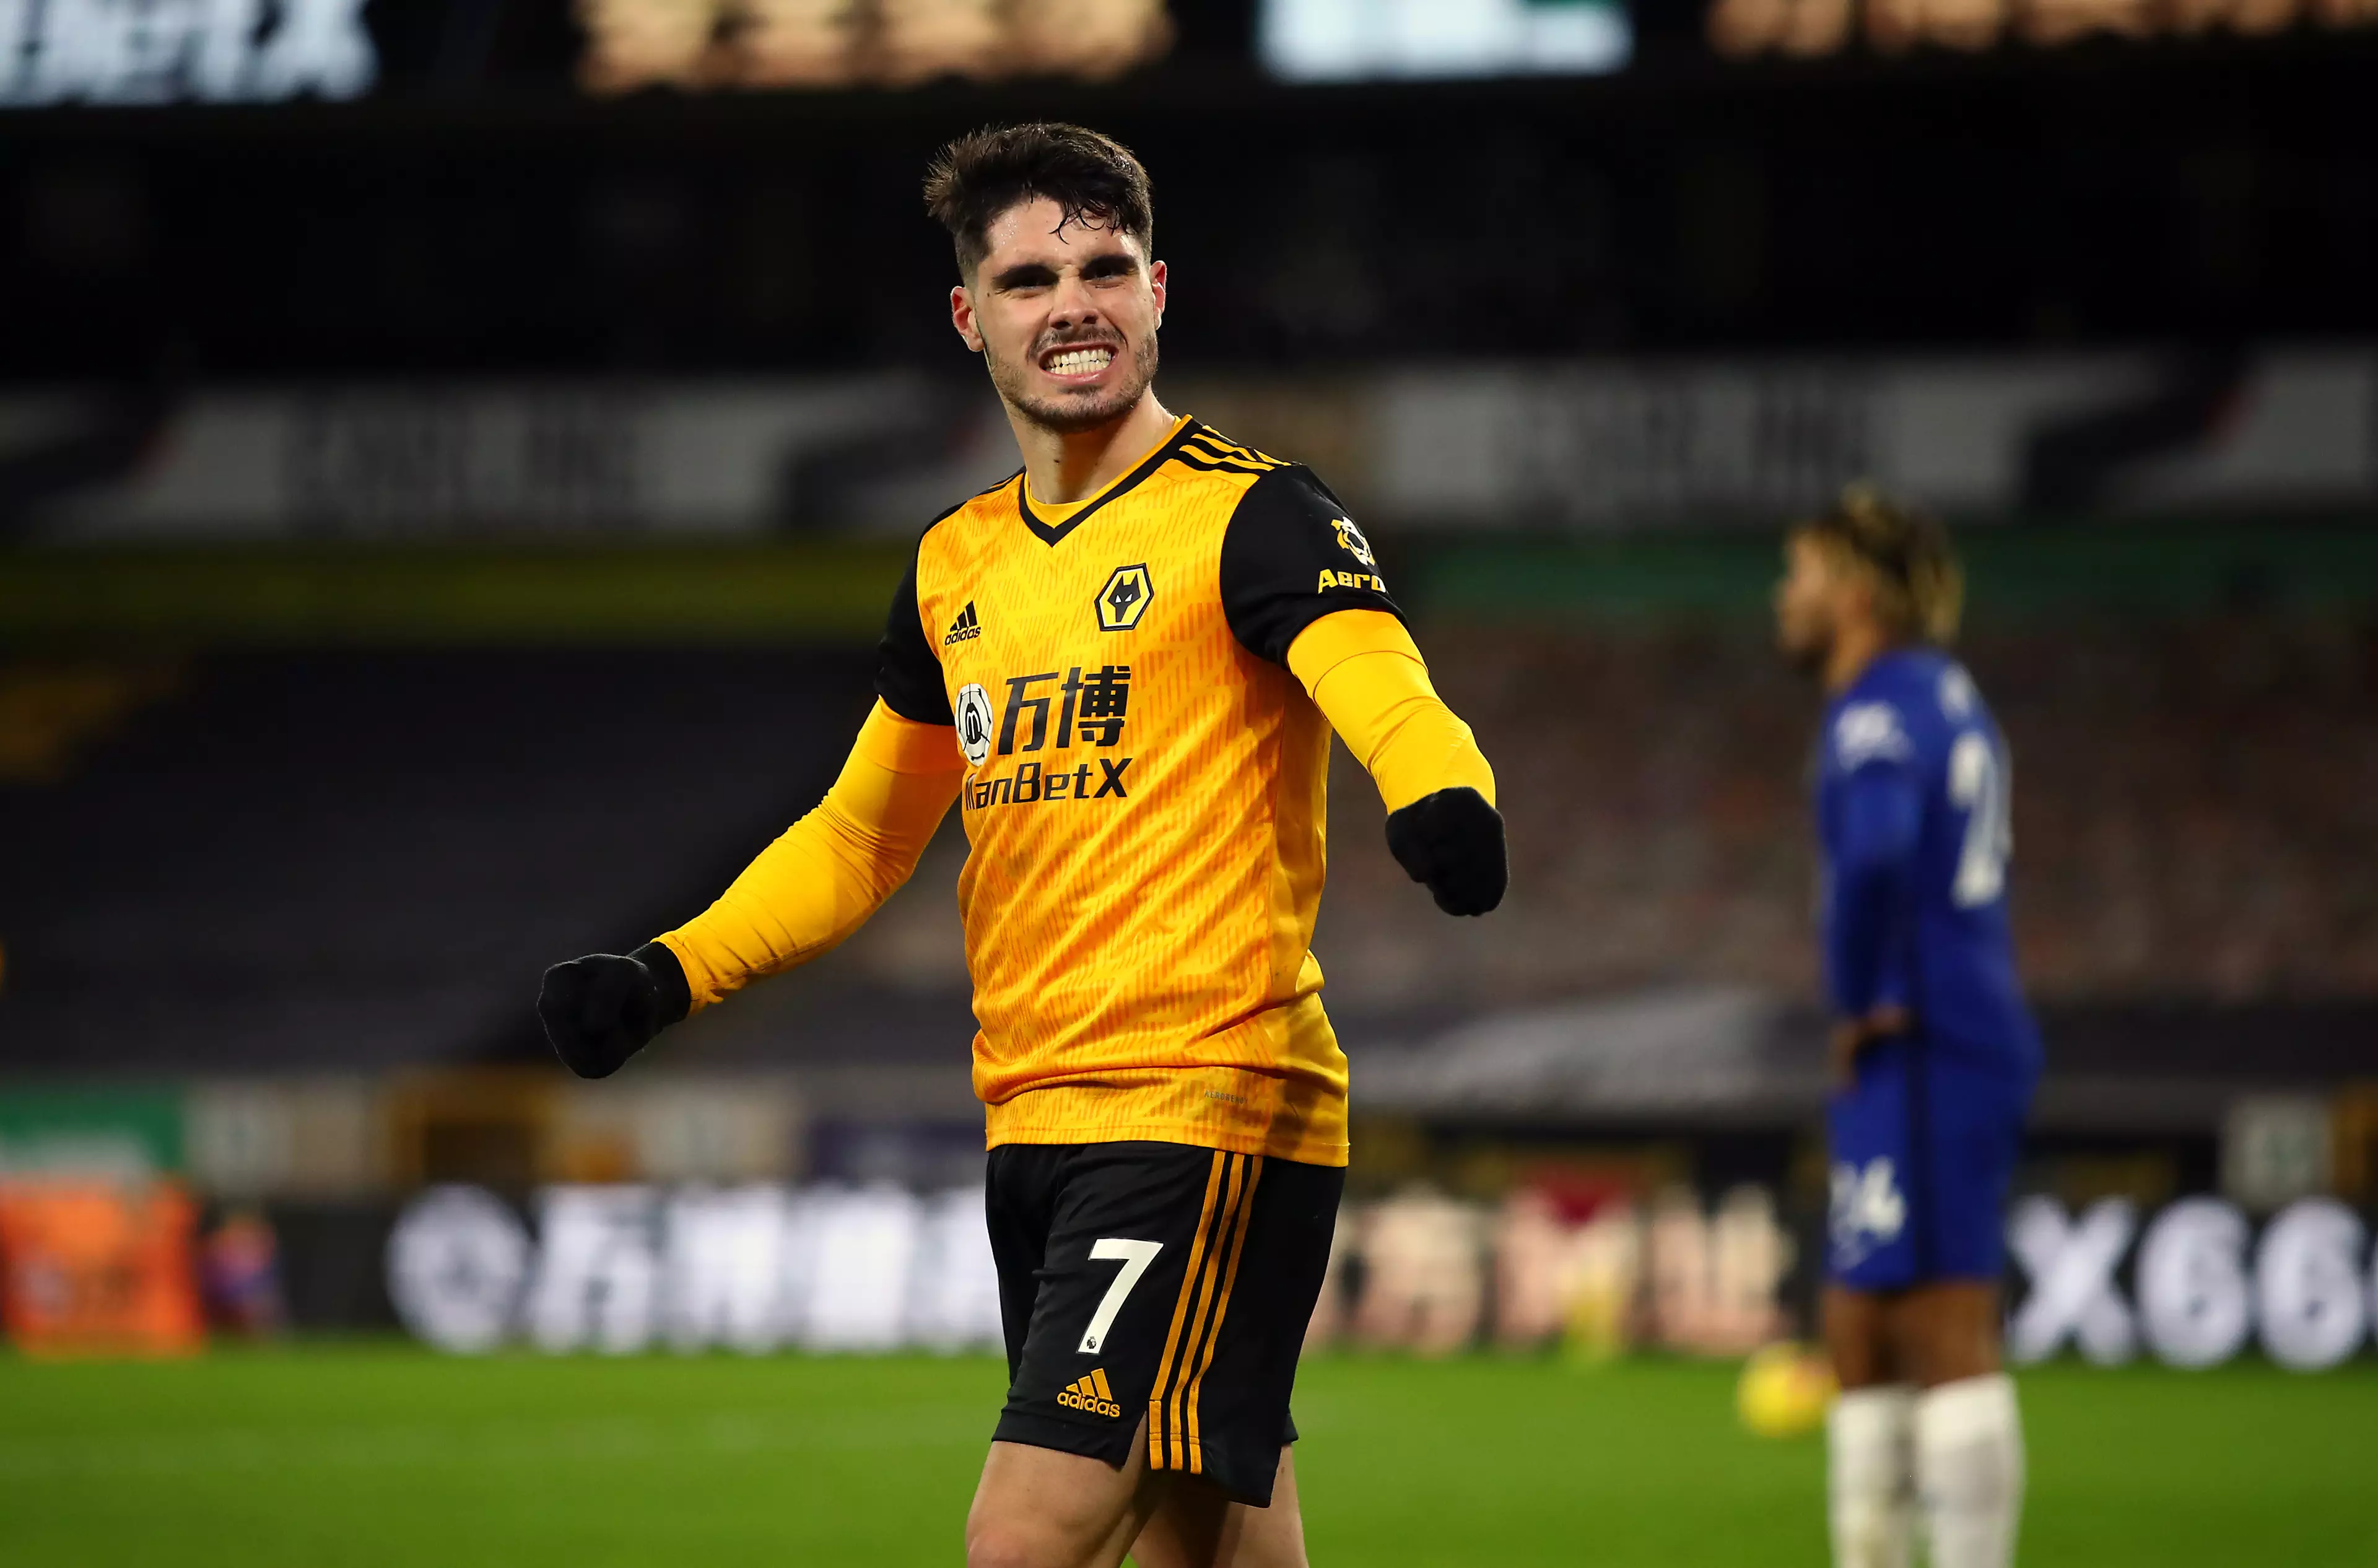 Pedro Neto has been a shining light for Wolves. Image: PA Images